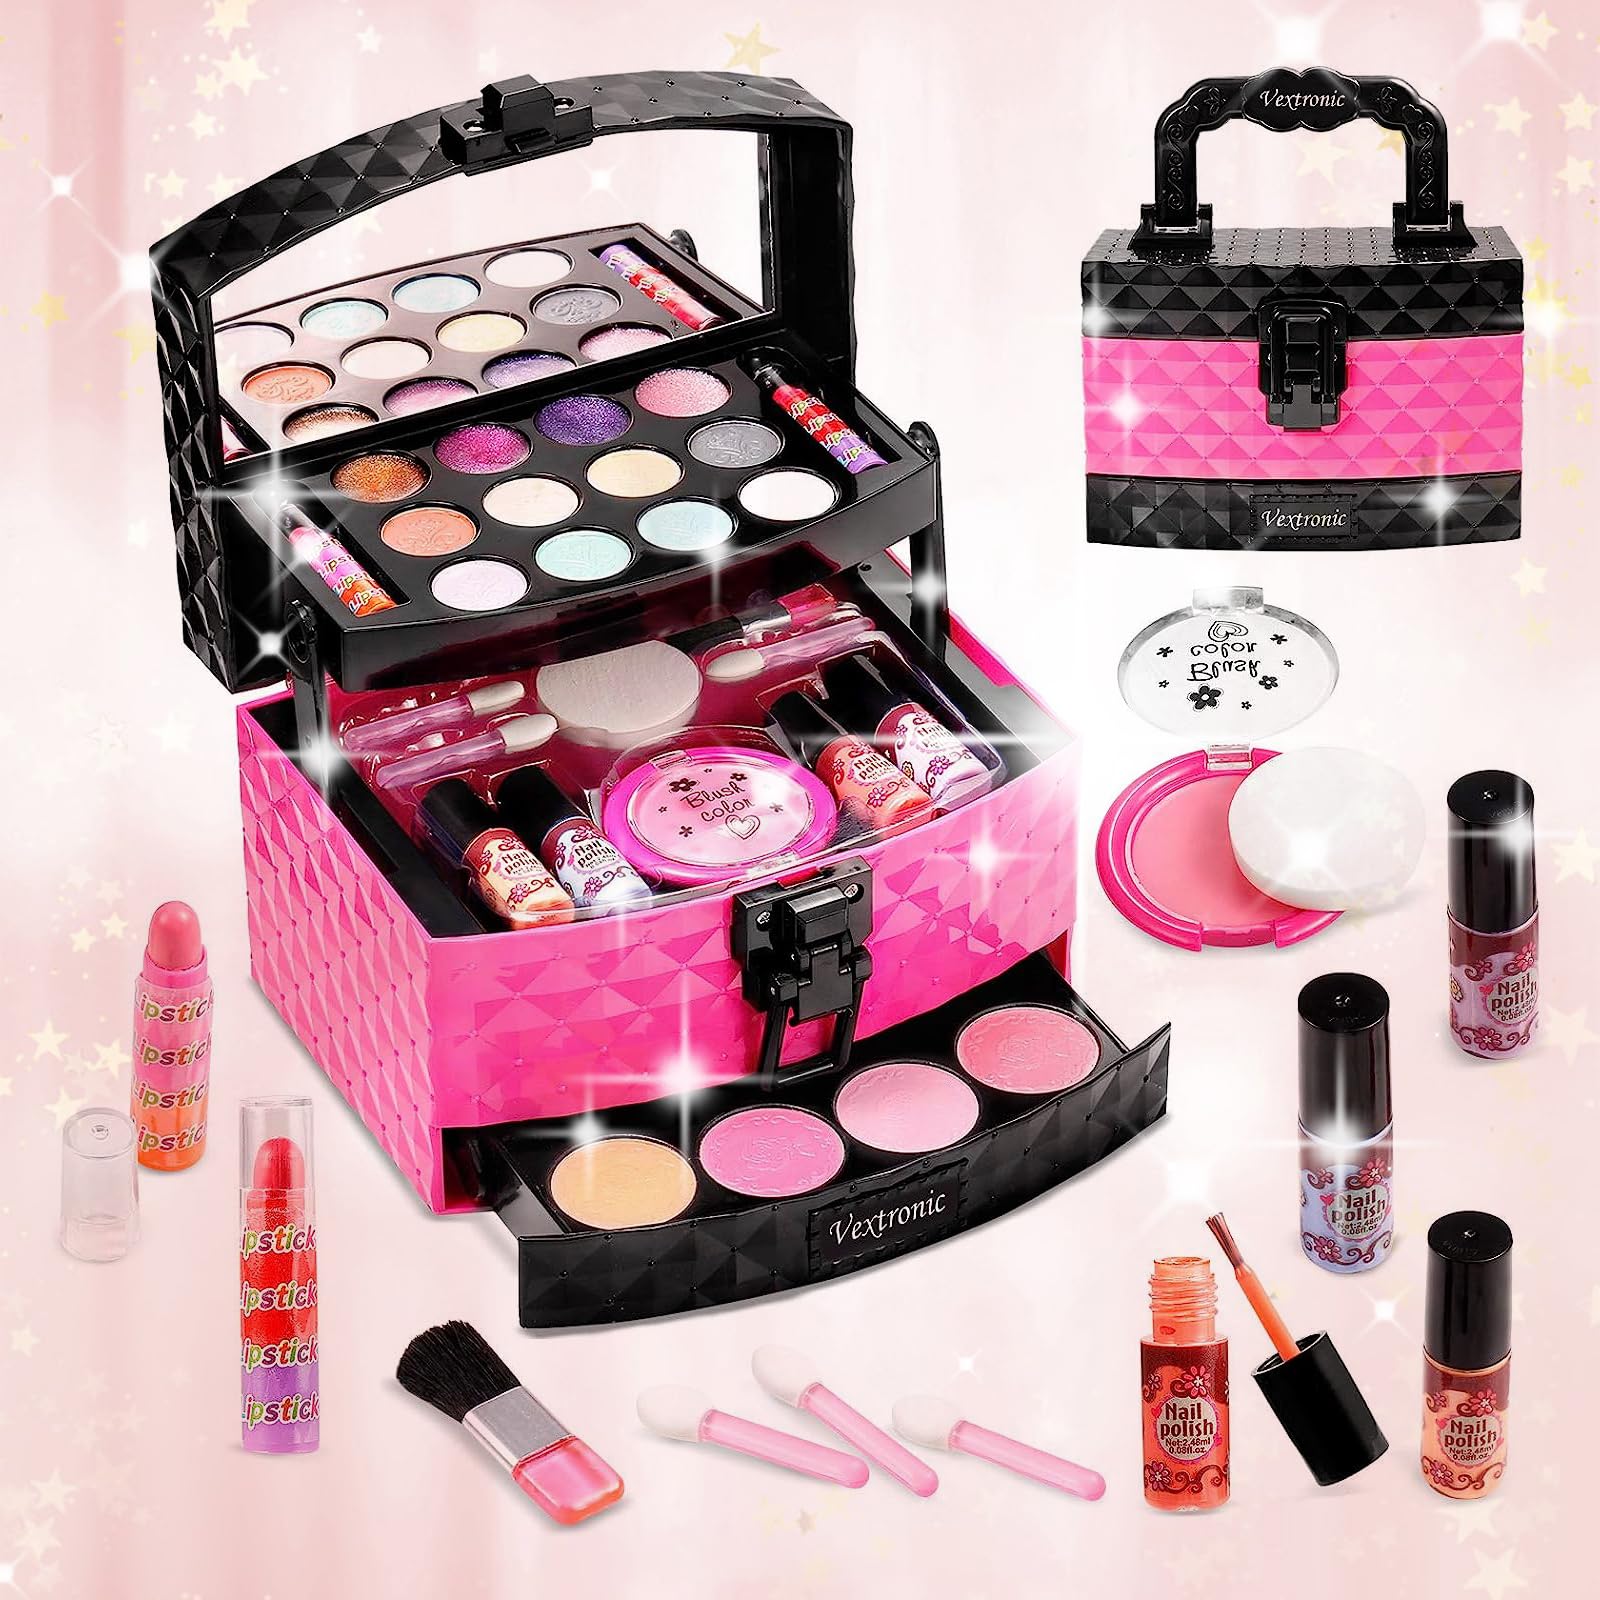 Vextronic Kids Makeup Kit for Girl, Washable Girls Makeup Kit, Non-Toxic Pretend Play Makeup for Toddlers Little Girls Age 3 4 5 6 7 8 9 10 11 12, Toddler Makeup Set Toy, Birthday Gifts Black Pink